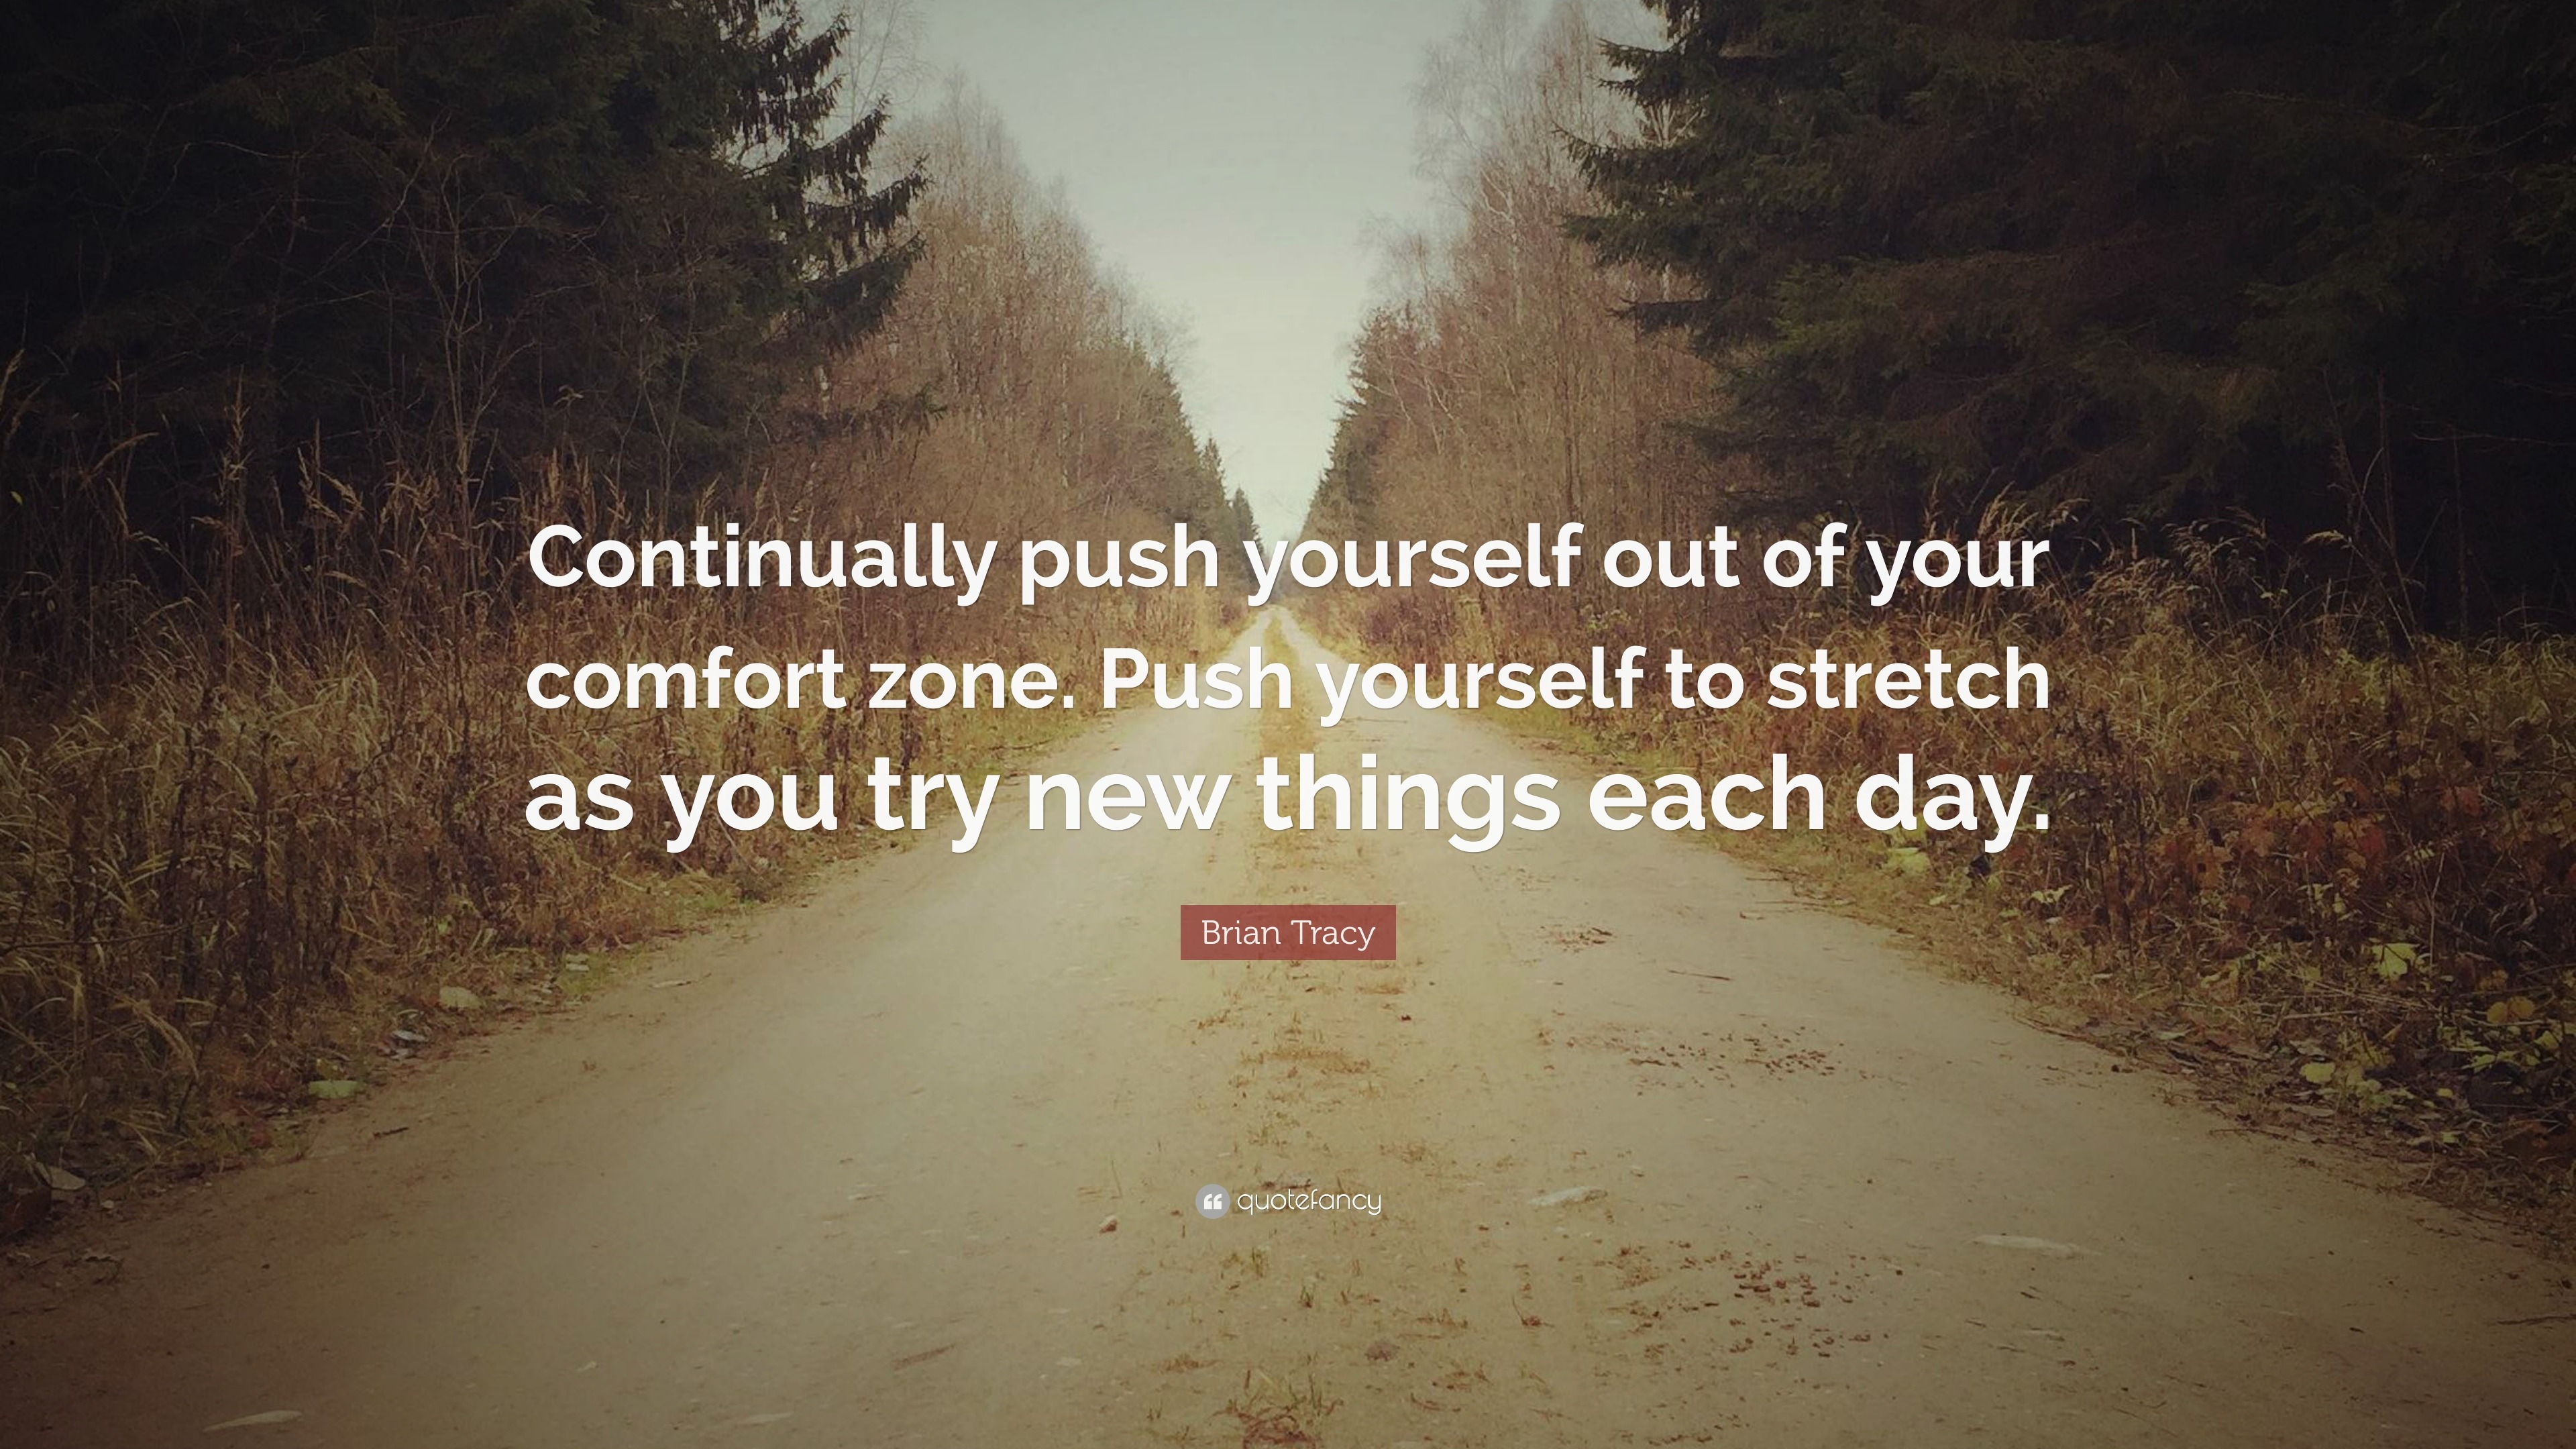 Brian Tracy Quote: “Continually push yourself out of your comfort zone